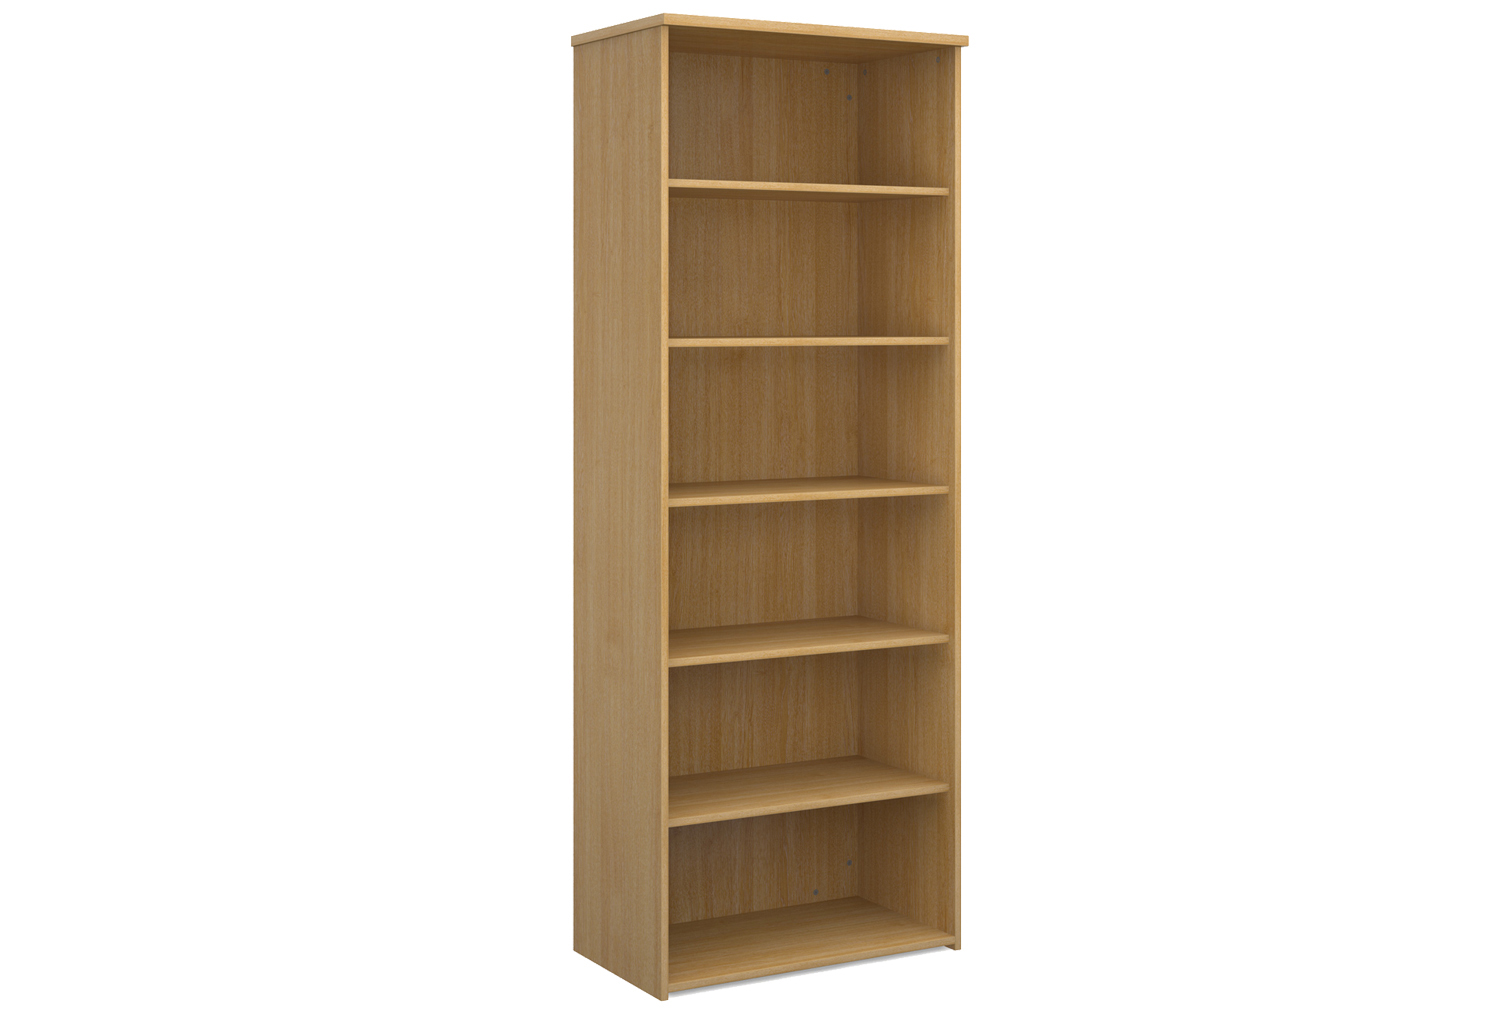 All Oak Office Bookcases, 5 Shelf - 80wx47dx214h (cm), Fully Installed